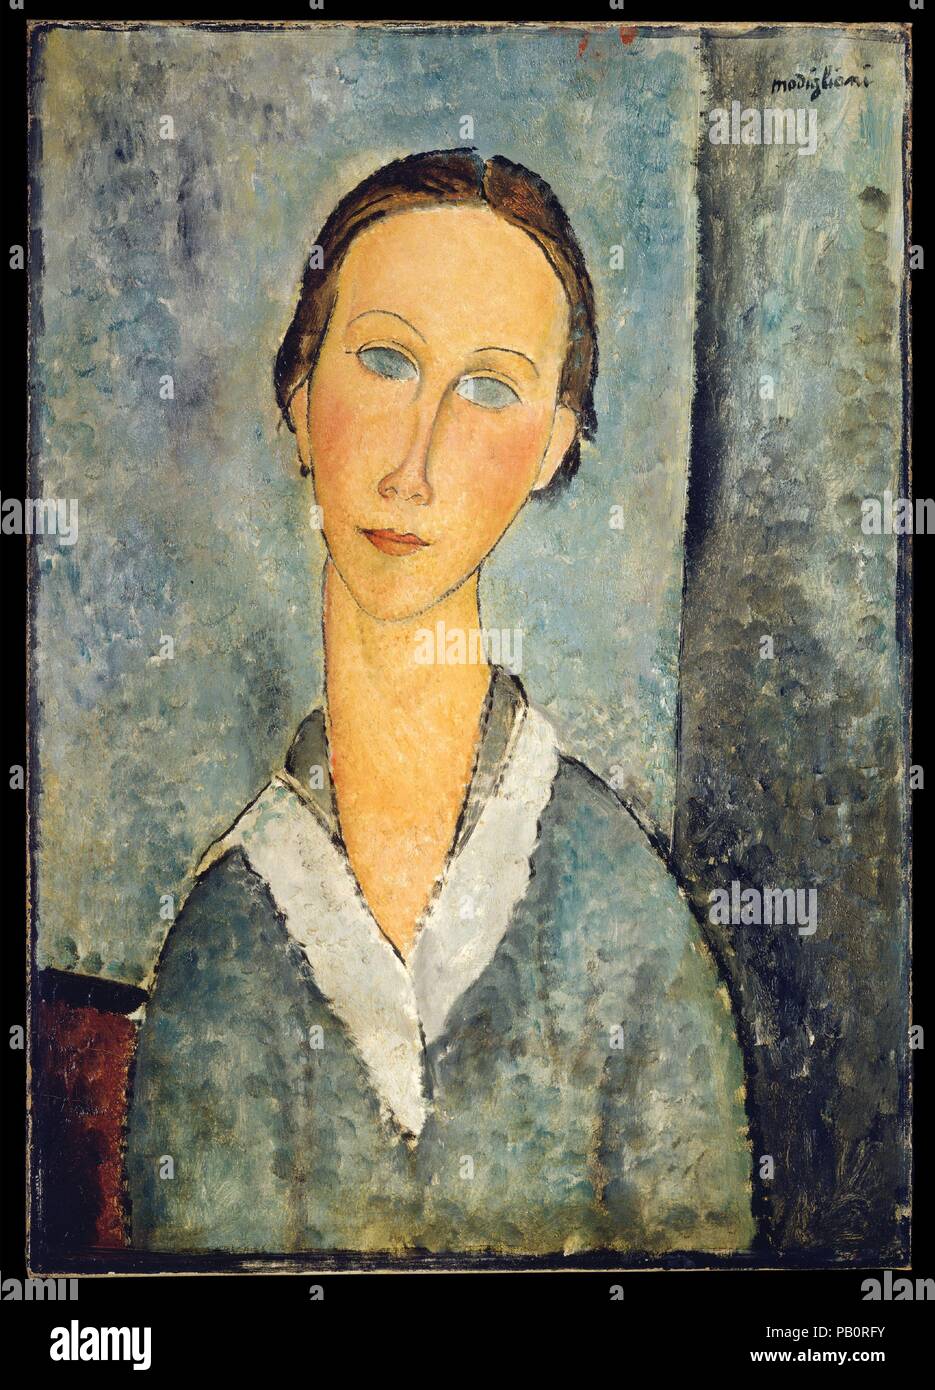 Girl in a Sailor's Blouse. Artist: Amedeo Modigliani (Italian, Livorno 1884-1920 Paris). Dimensions: 25 3/4 × 18 1/4 in. (65.4 × 46.4 cm). Date: 1918.  From March 1918 until May 1919 the ailing Modigliani lived in the south of France-mainly in Nice-to recuperate in the healthy climate. Lacking his usual coterie of friends, he employed local young servants, shopgirls, and children as models. Museum: Metropolitan Museum of Art, New York, USA. Stock Photo